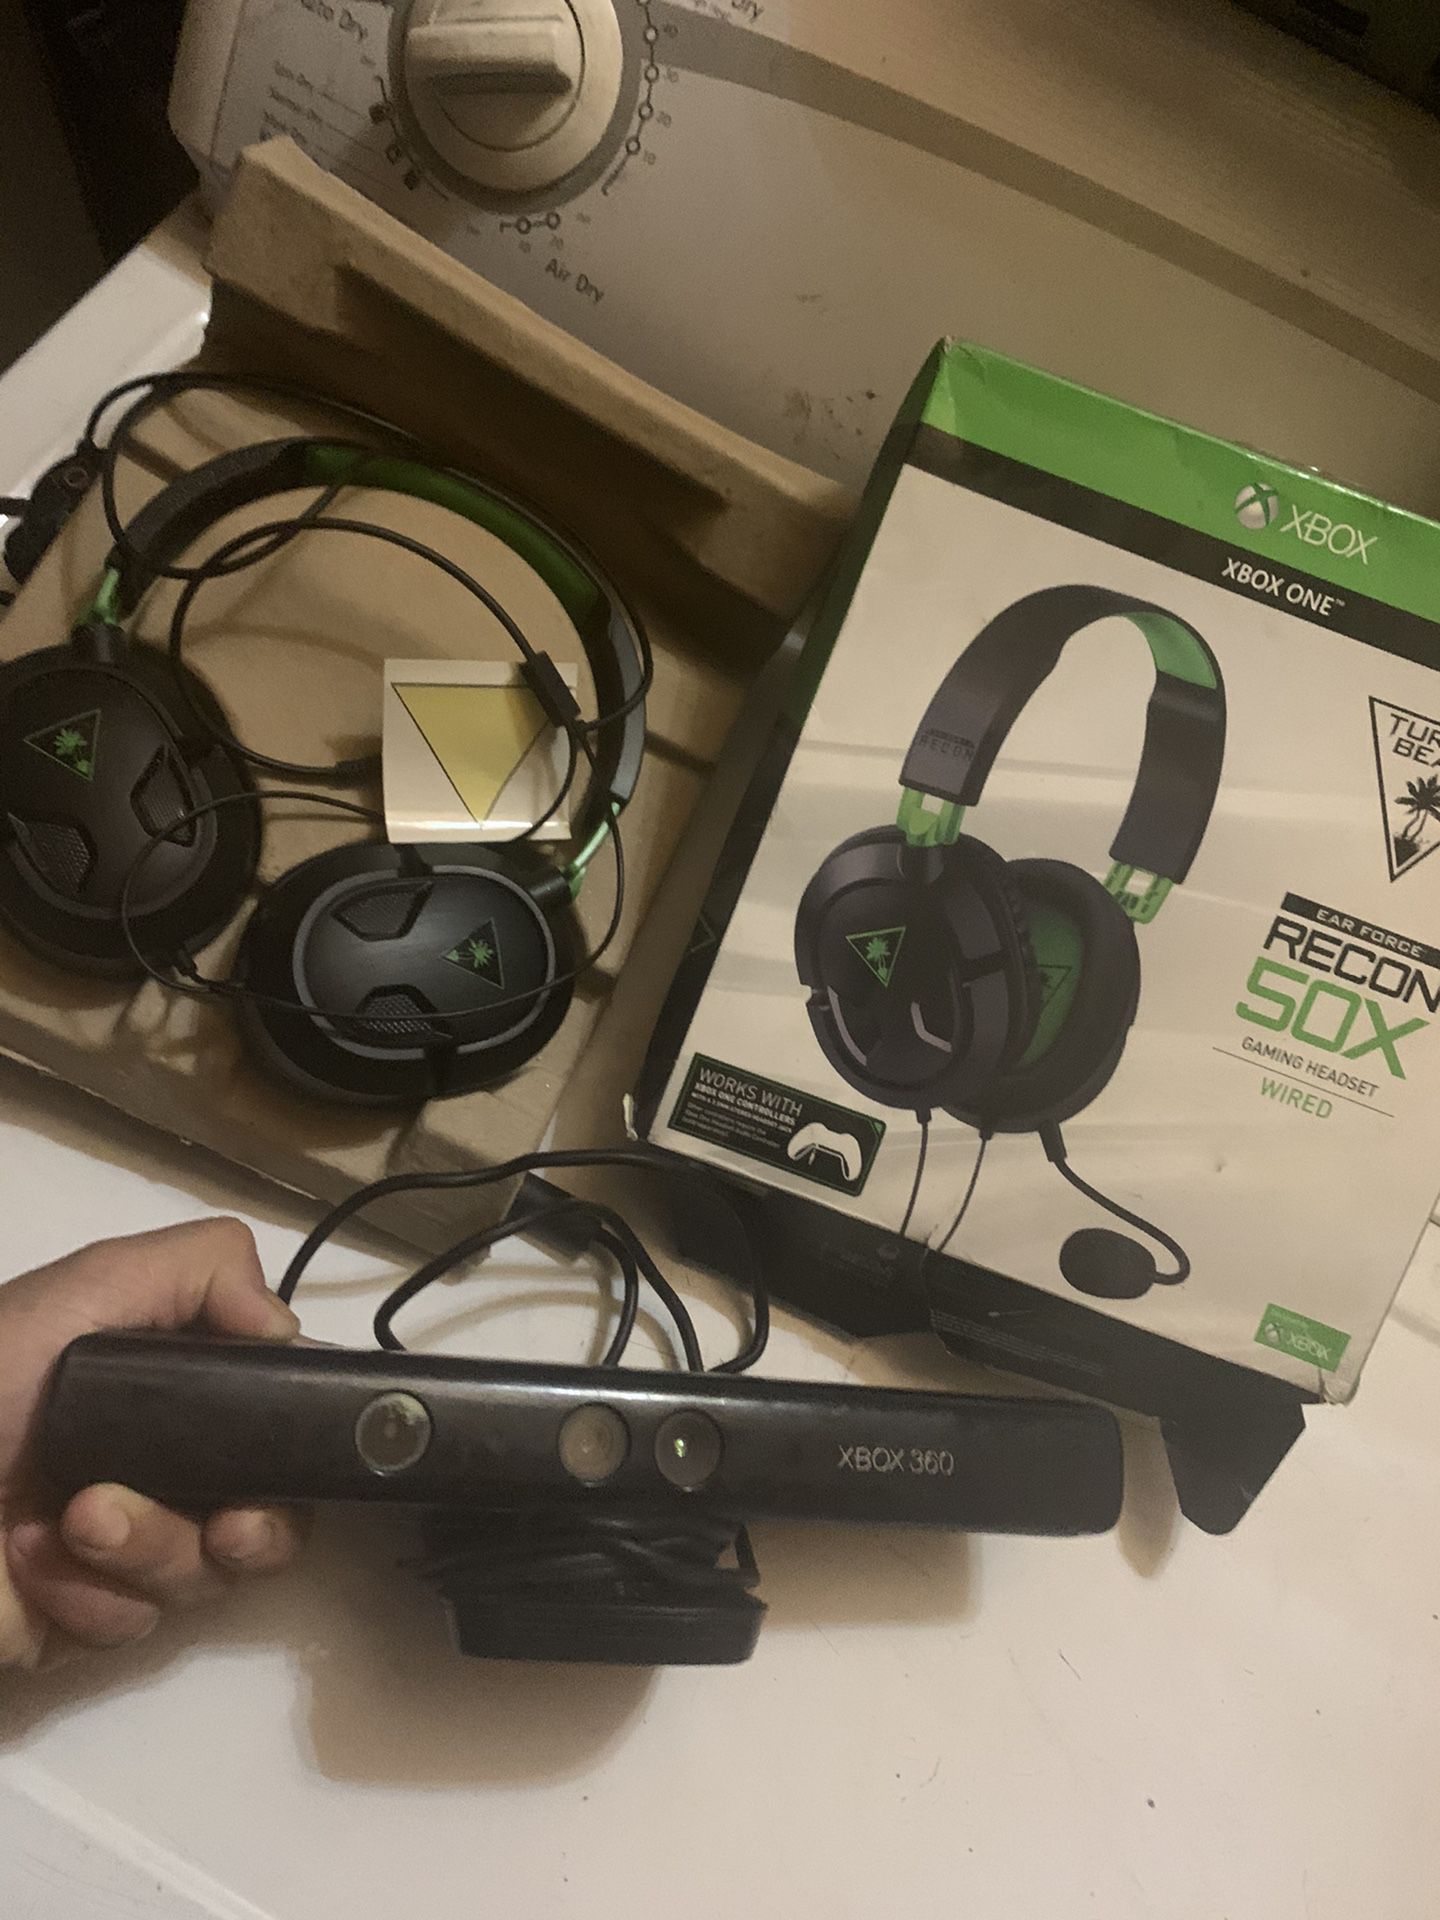 Camara XBOX 360 y GAMING HEADSETS WIRED